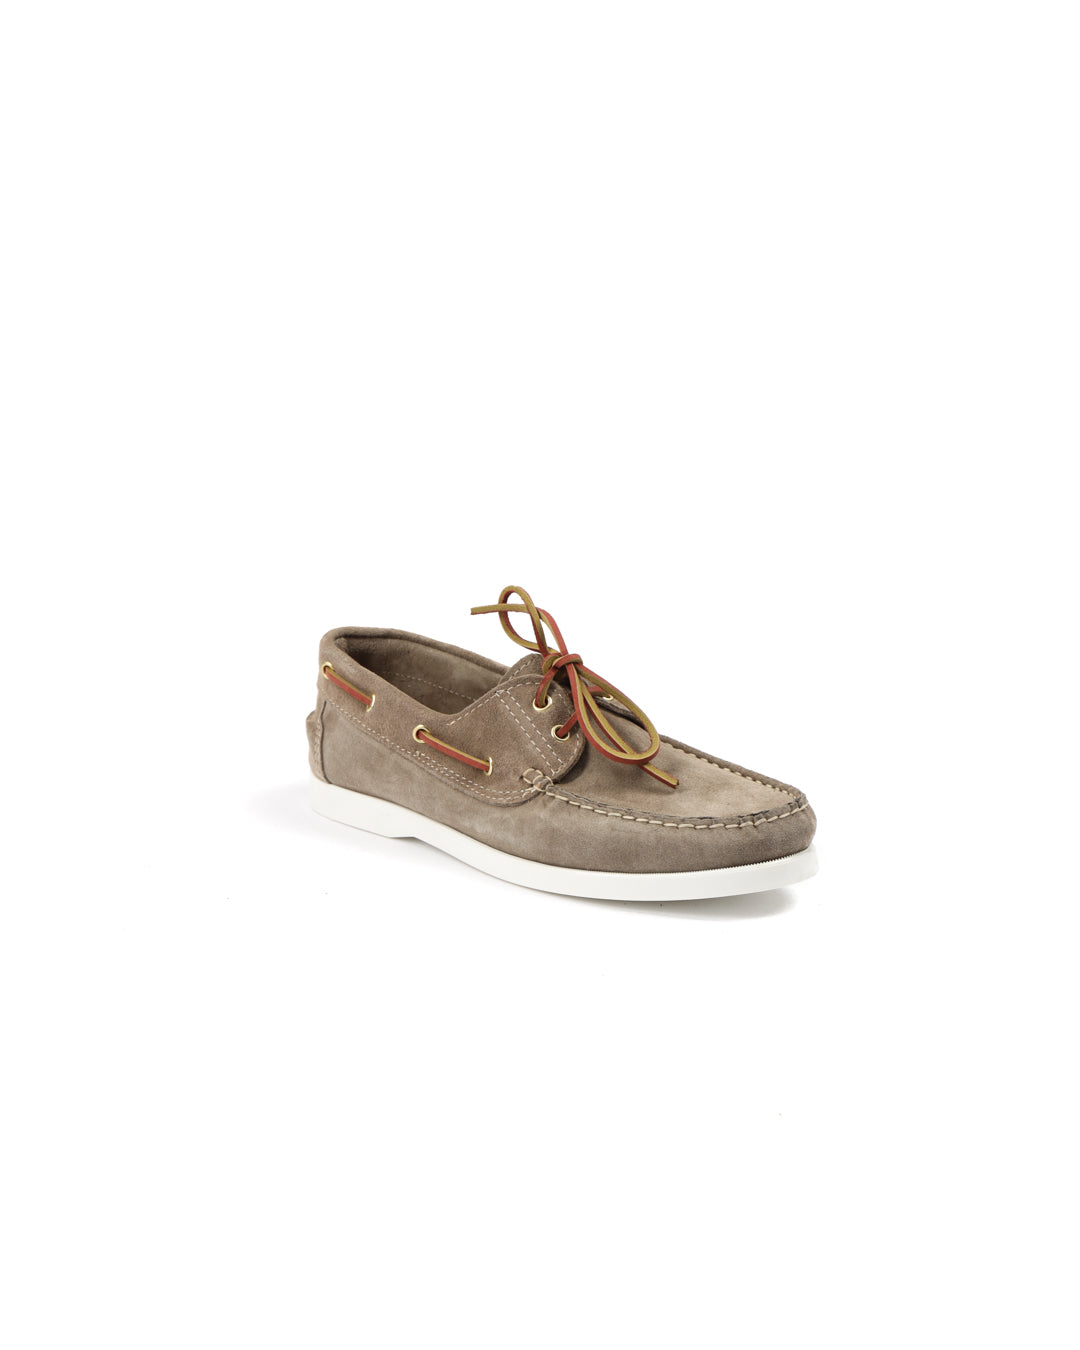 Jimmy - dove gray suede boat